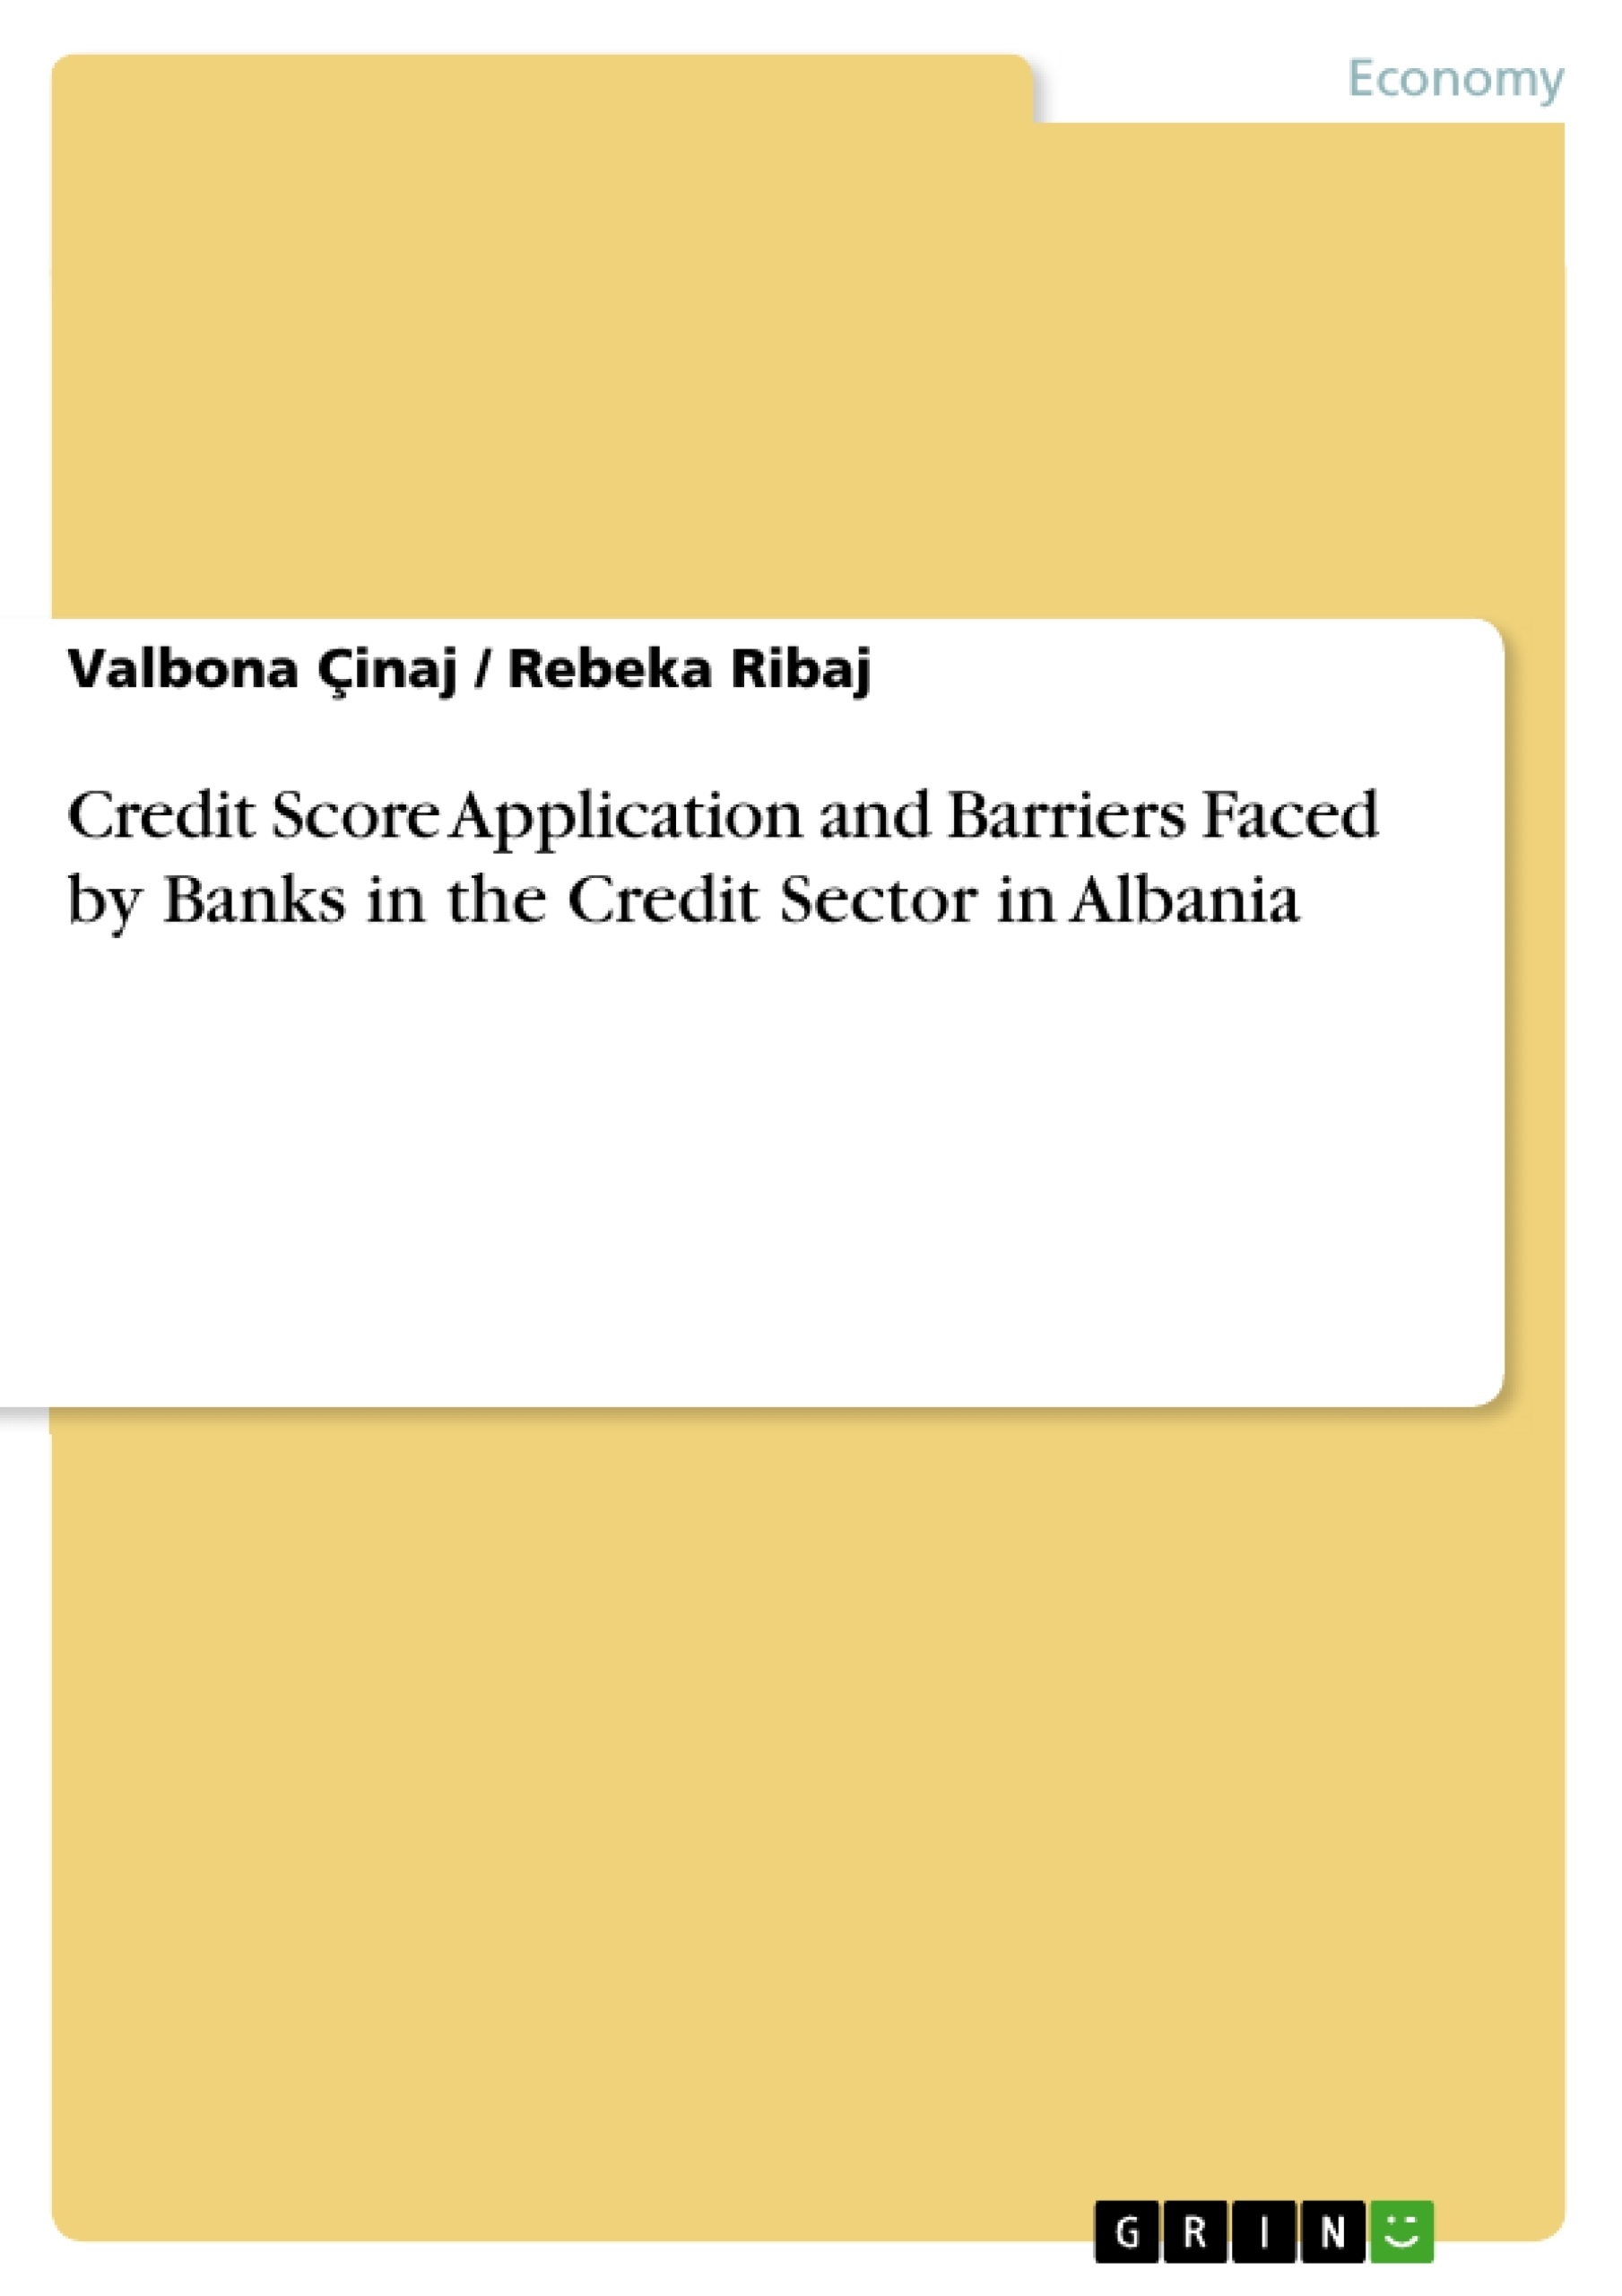 Title: Credit Score Application and Barriers Faced by Banks in the Credit Sector in Albania